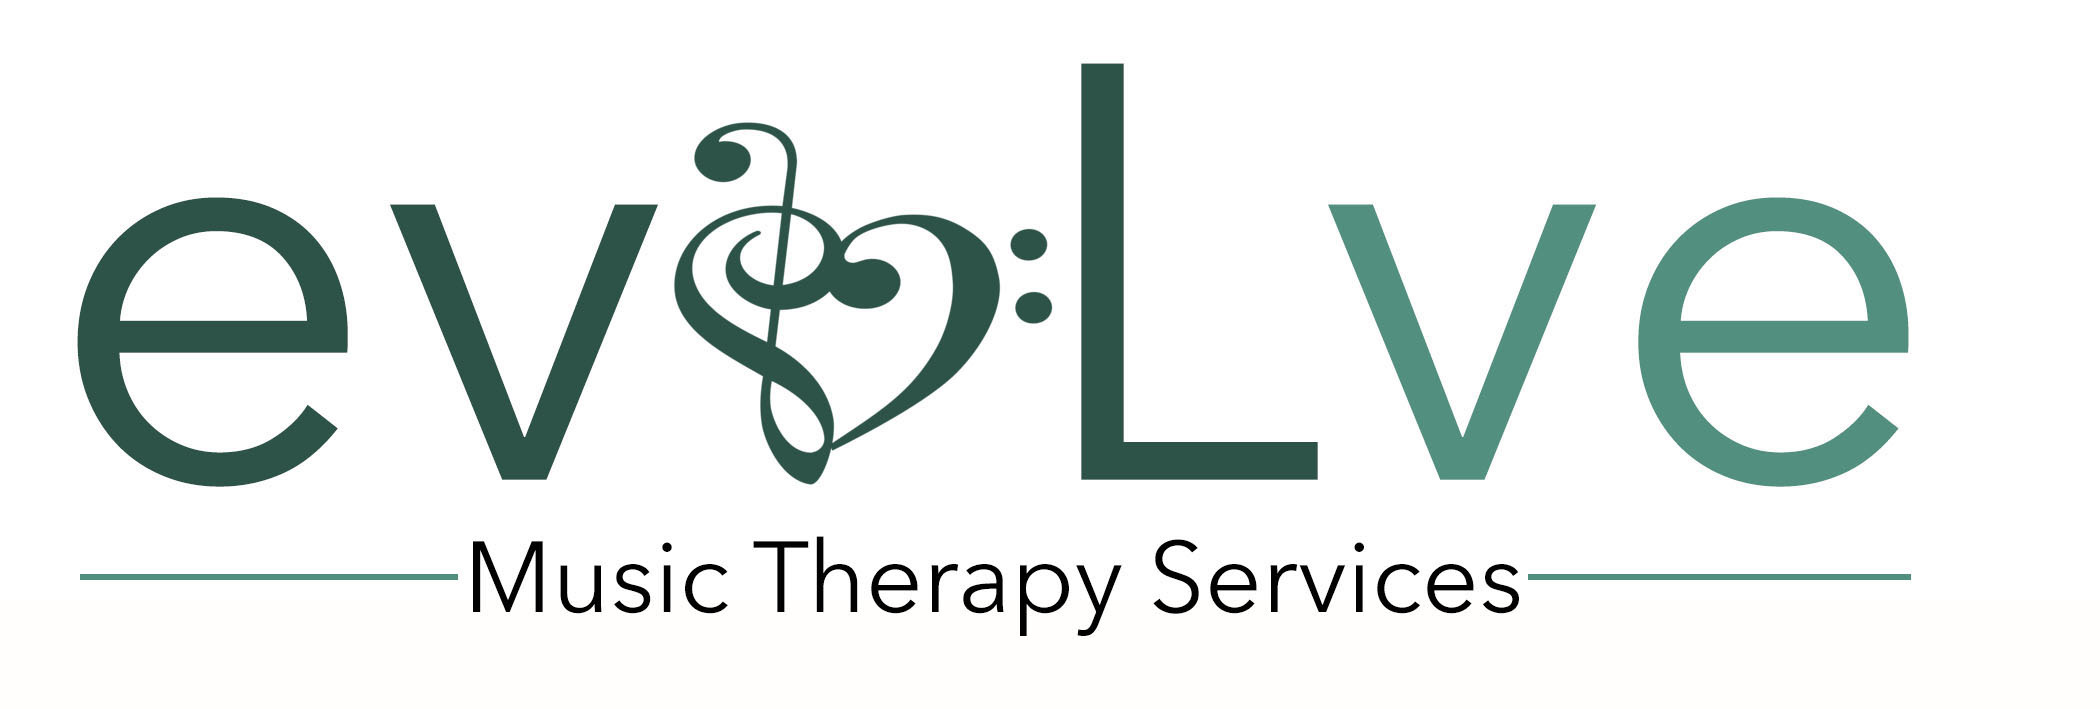 Evolve Music Therapy logo